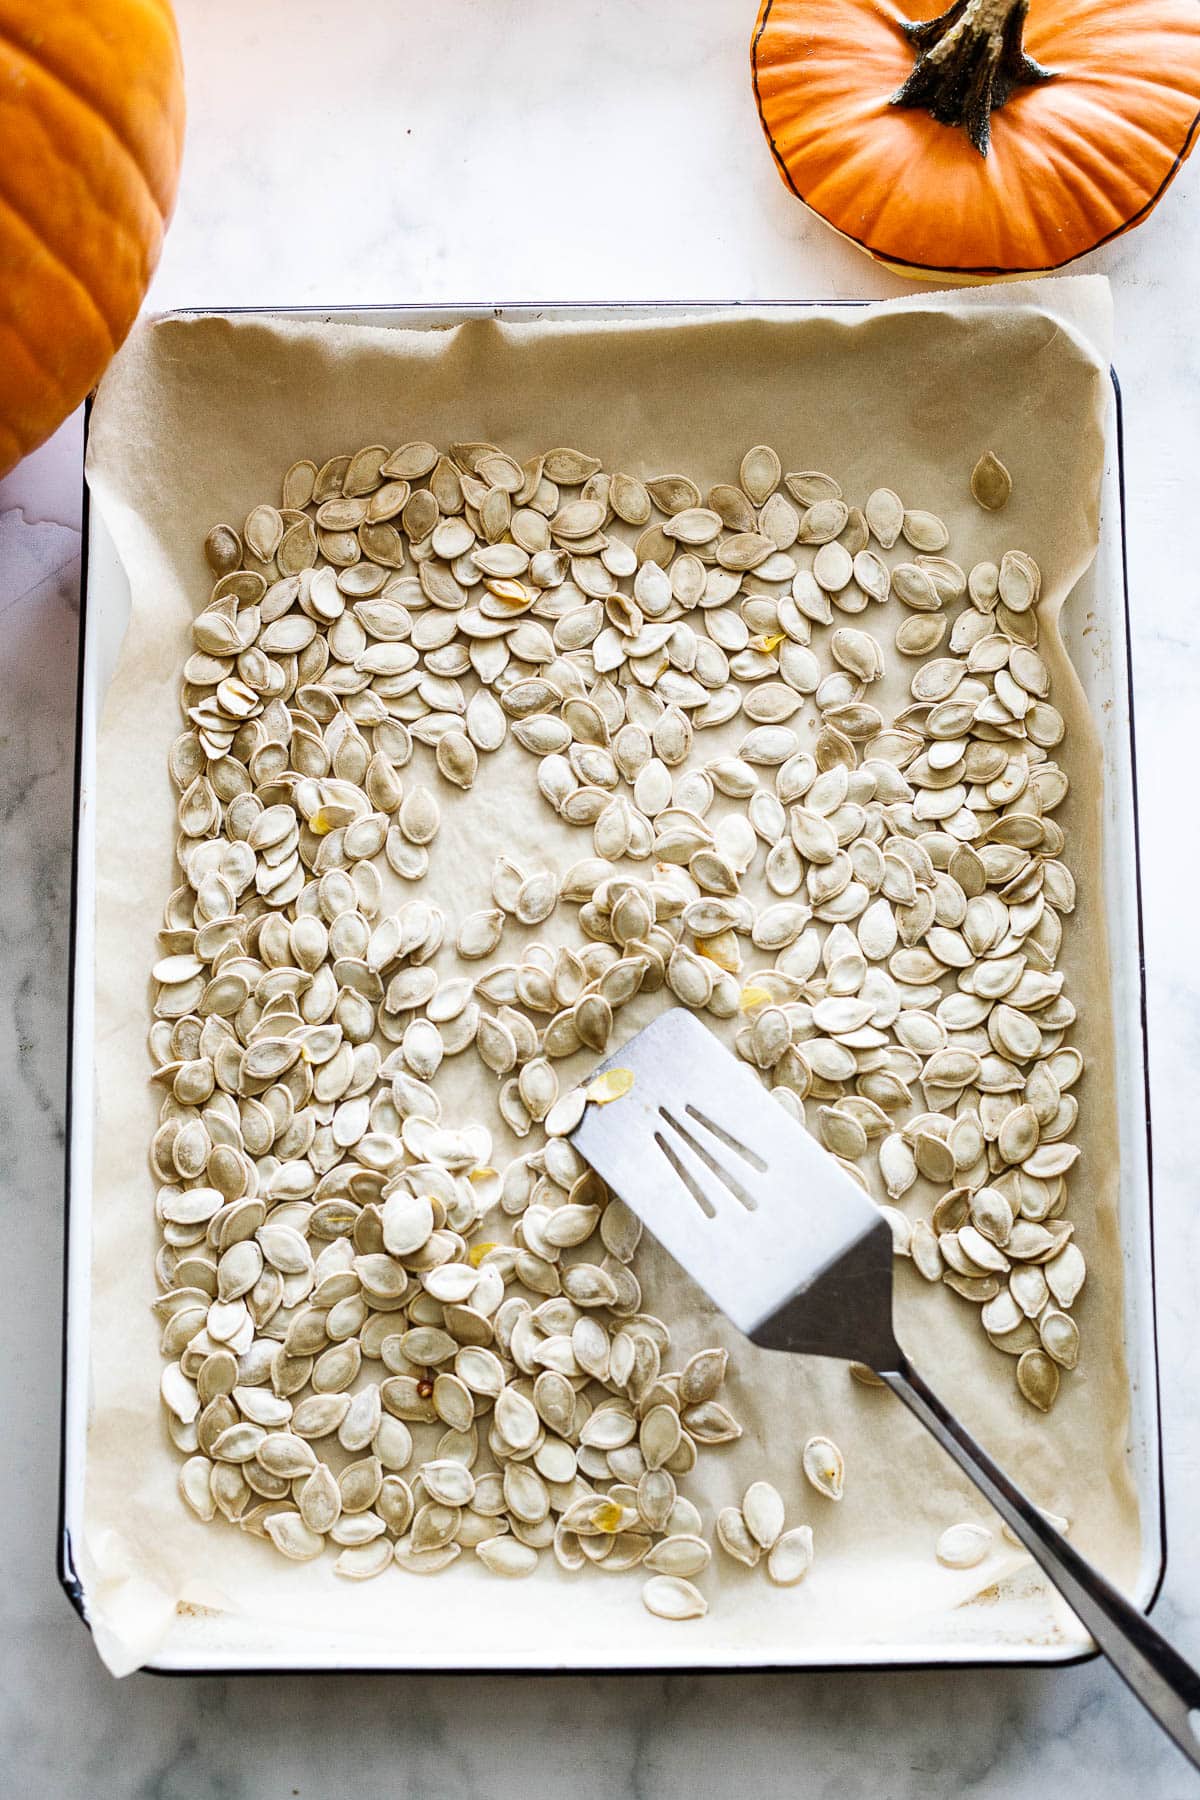 dry the pumpkin seeds and spread them out.